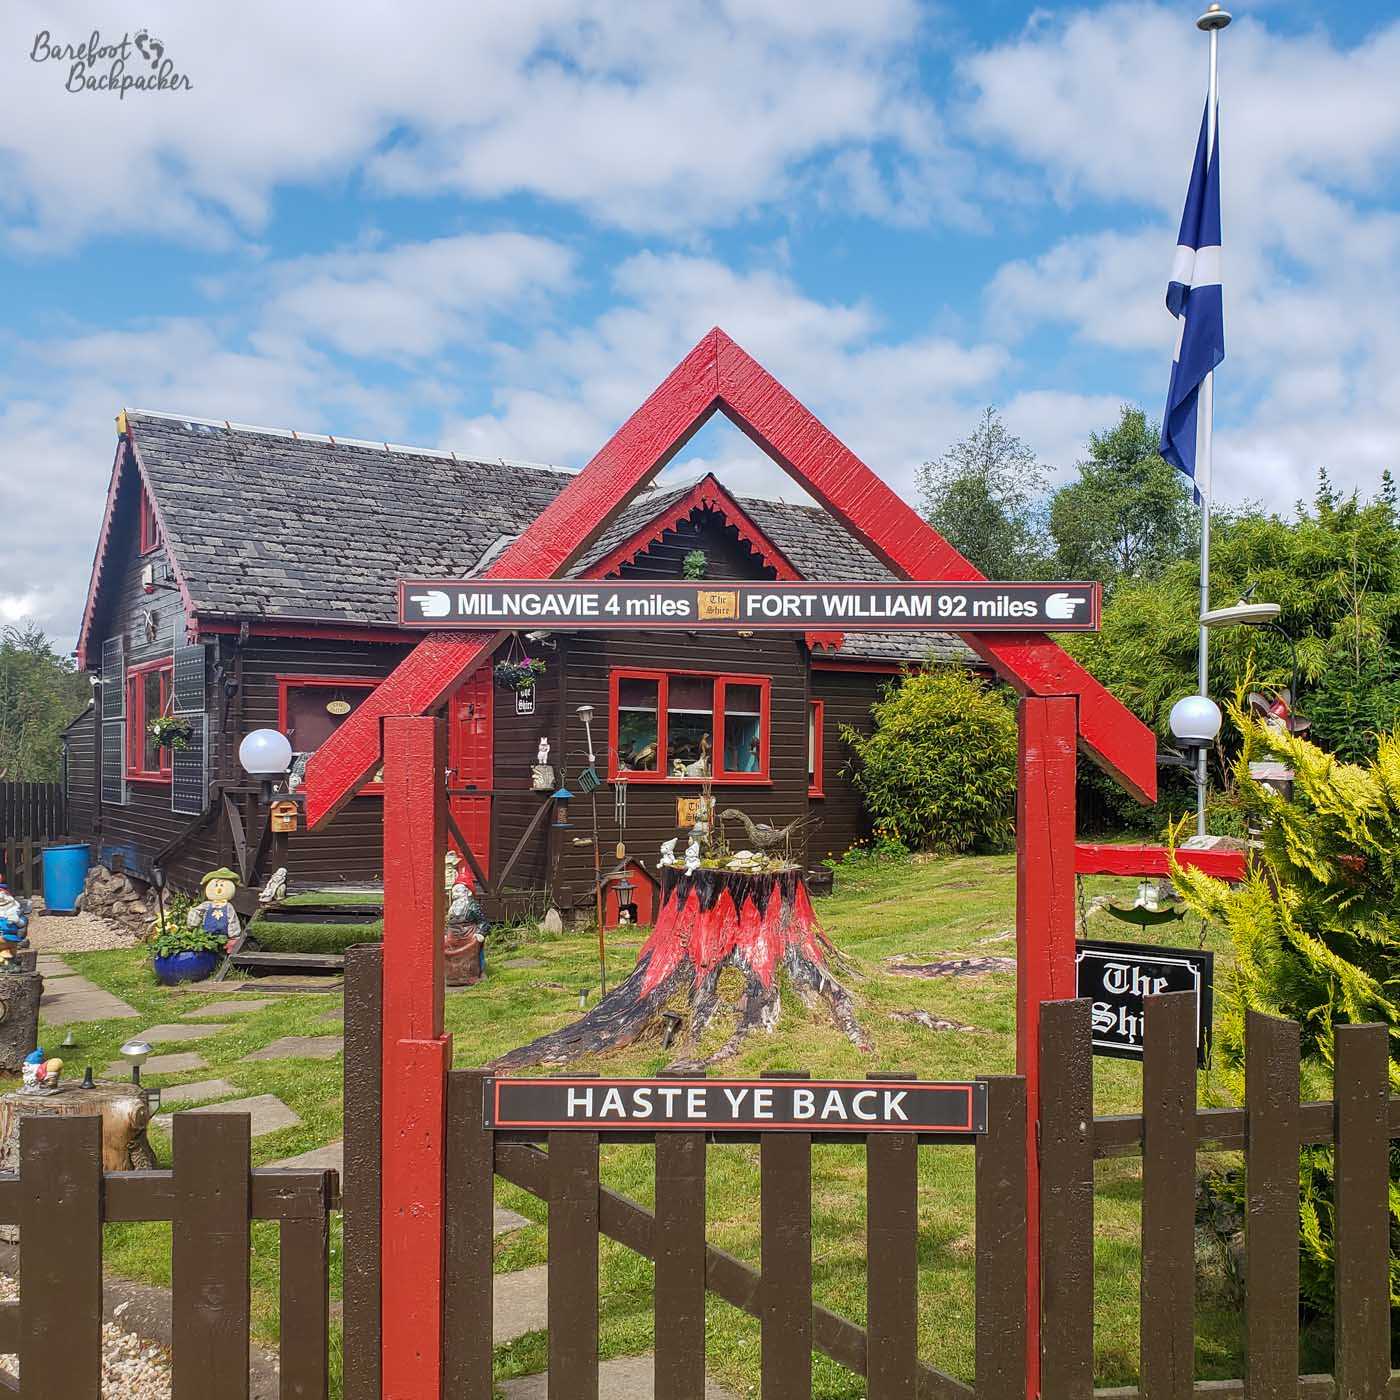 An odd cottage, fronted by a traditional wooden fence with slats,. The cottage has a stone roof but is fronted by what look like wooden panels, like a log cabin. The garden is full of trinkets like gnomes, animal statues, and a tree stump painted to look like fire. Signs on the fence say 'haste ye back', and indicating it's 4 miles to Milngavie and 92 to Fort William. There is a Scotland flag drooping from a flagpole to the right of shot. Lots of signs tell you this cottage is called 'The Shire'.